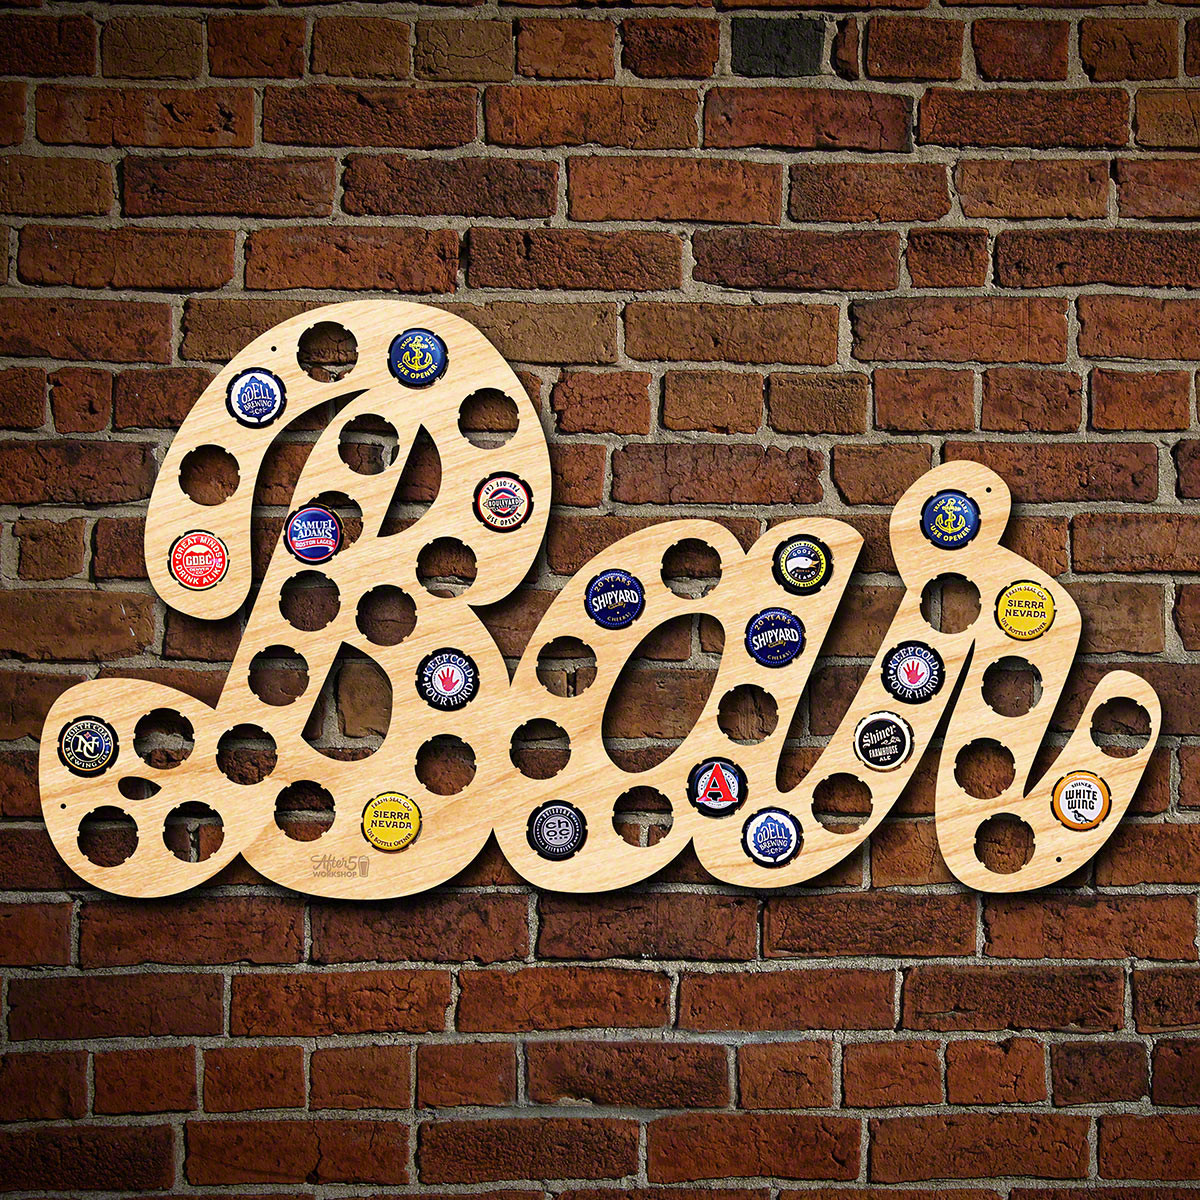 If you pride your home bar a place where the beer flows and good friends gather then you'll love this unique piece of man cave decor. Crafted from American sourced 1/4" cut birch plywood and laser cut in our own Oklahoma factory, this beer cap map is the #bar